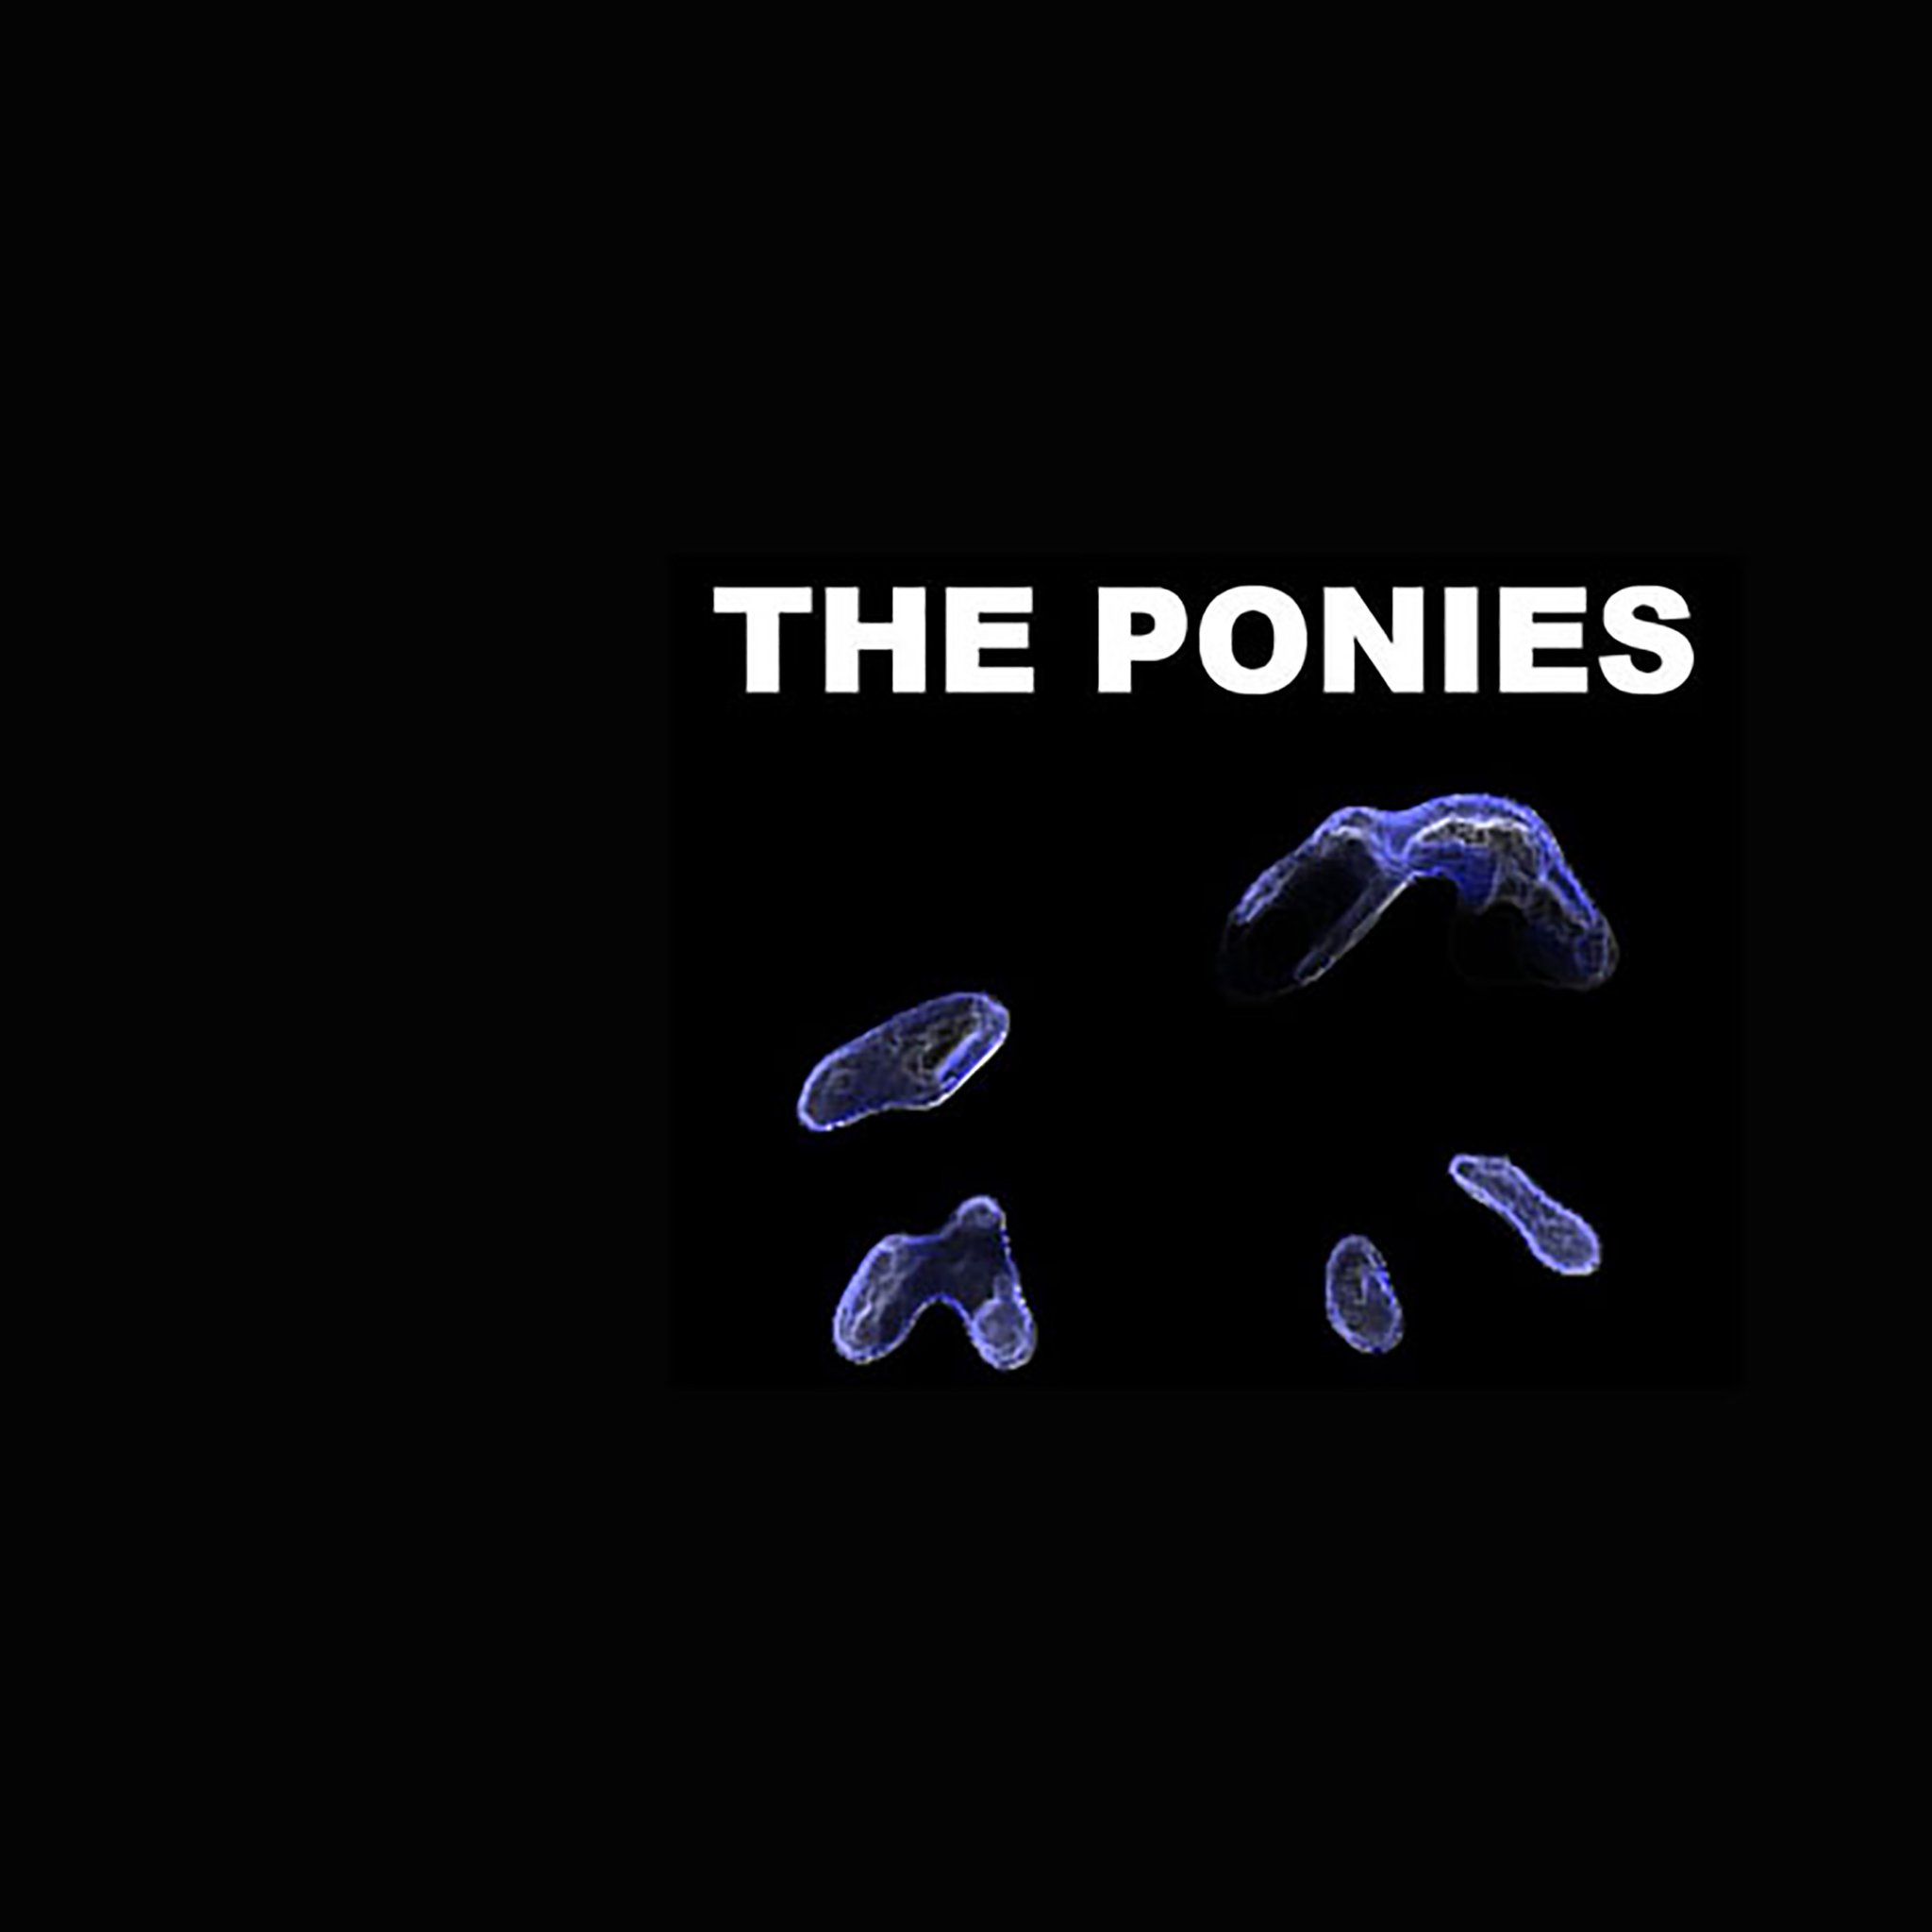 The Ponies, a small band based in Johannesburg, South Africa. Spectral rock. Debut album https://t.co/7HPG8DOjVj
thebipolarponies@gmail.com